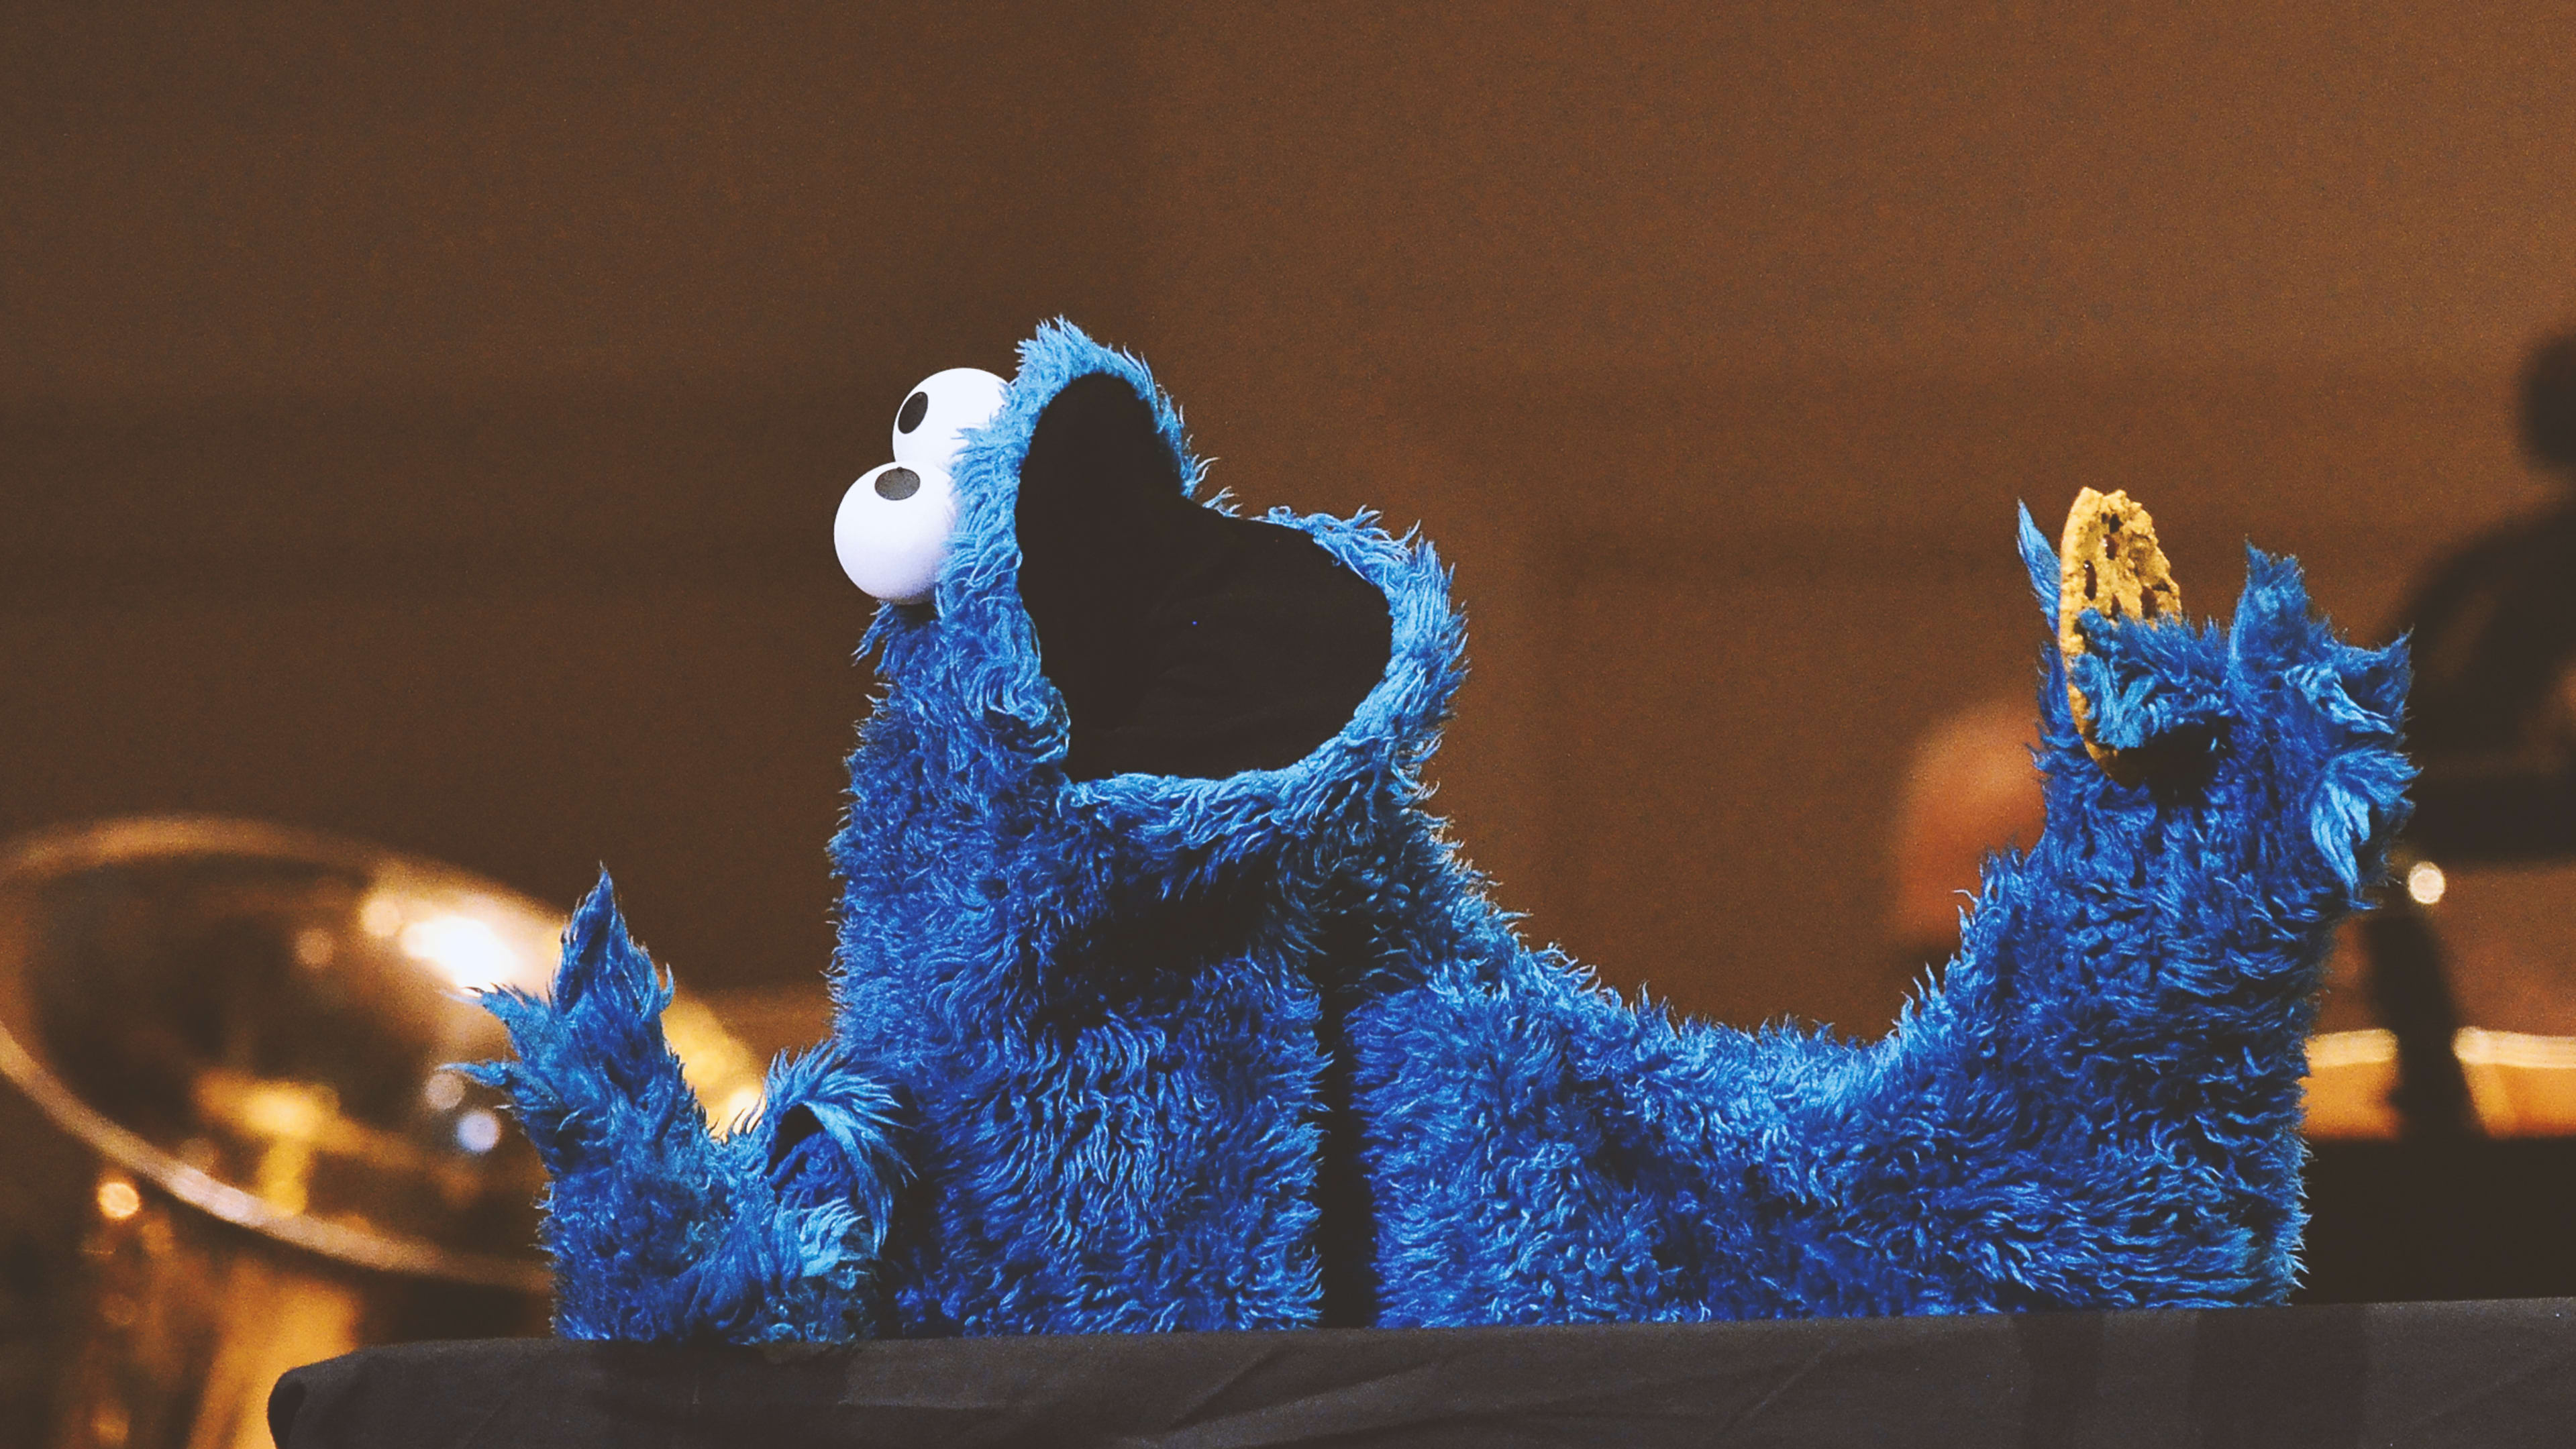 Sesame Street tackles iPhone addiction, and Cookie Monster can’t control himself